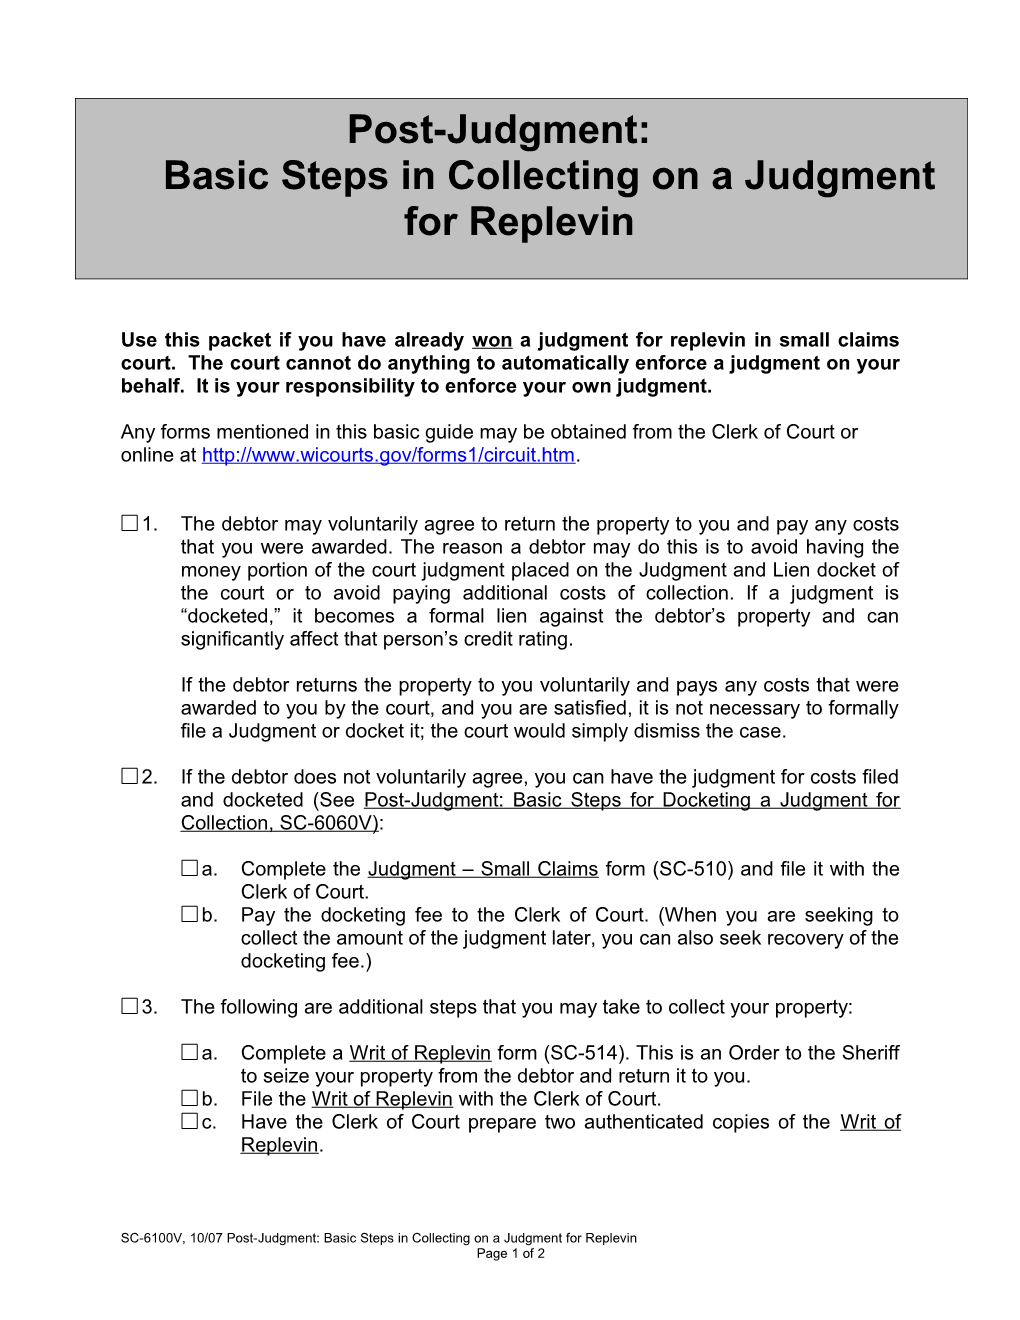 SC-6100: Post-Judgment: Basic Steps in Collecting on a Judgment for Replevin